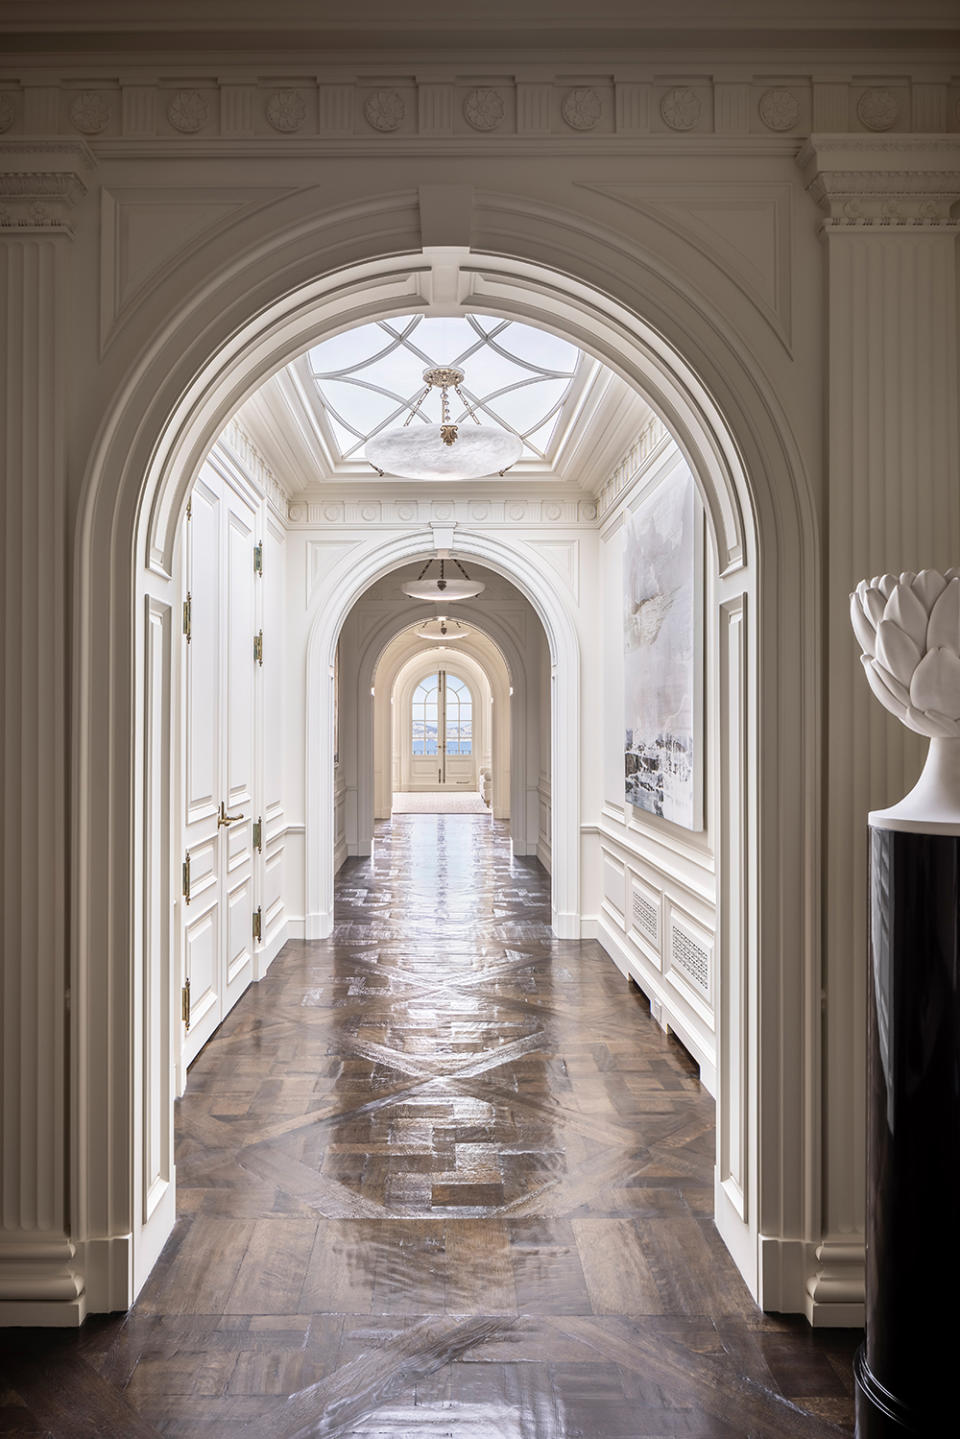 The enfilade off the entrance gallery.